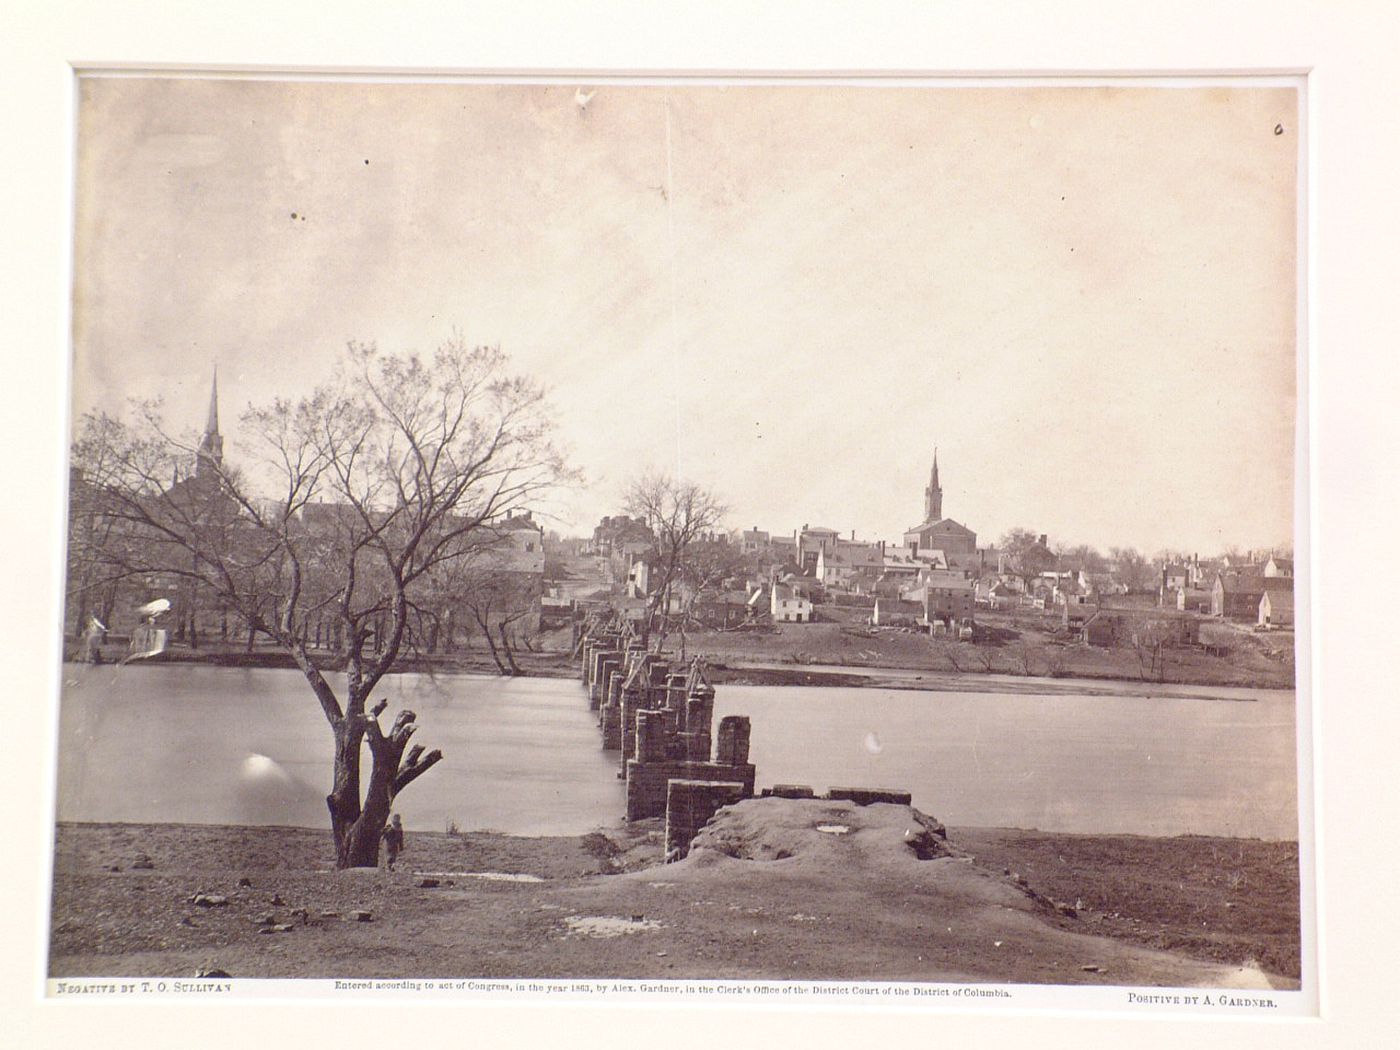 View of the ruins of a bridge with the town of Fredericksburg in the background, Virginia, United States